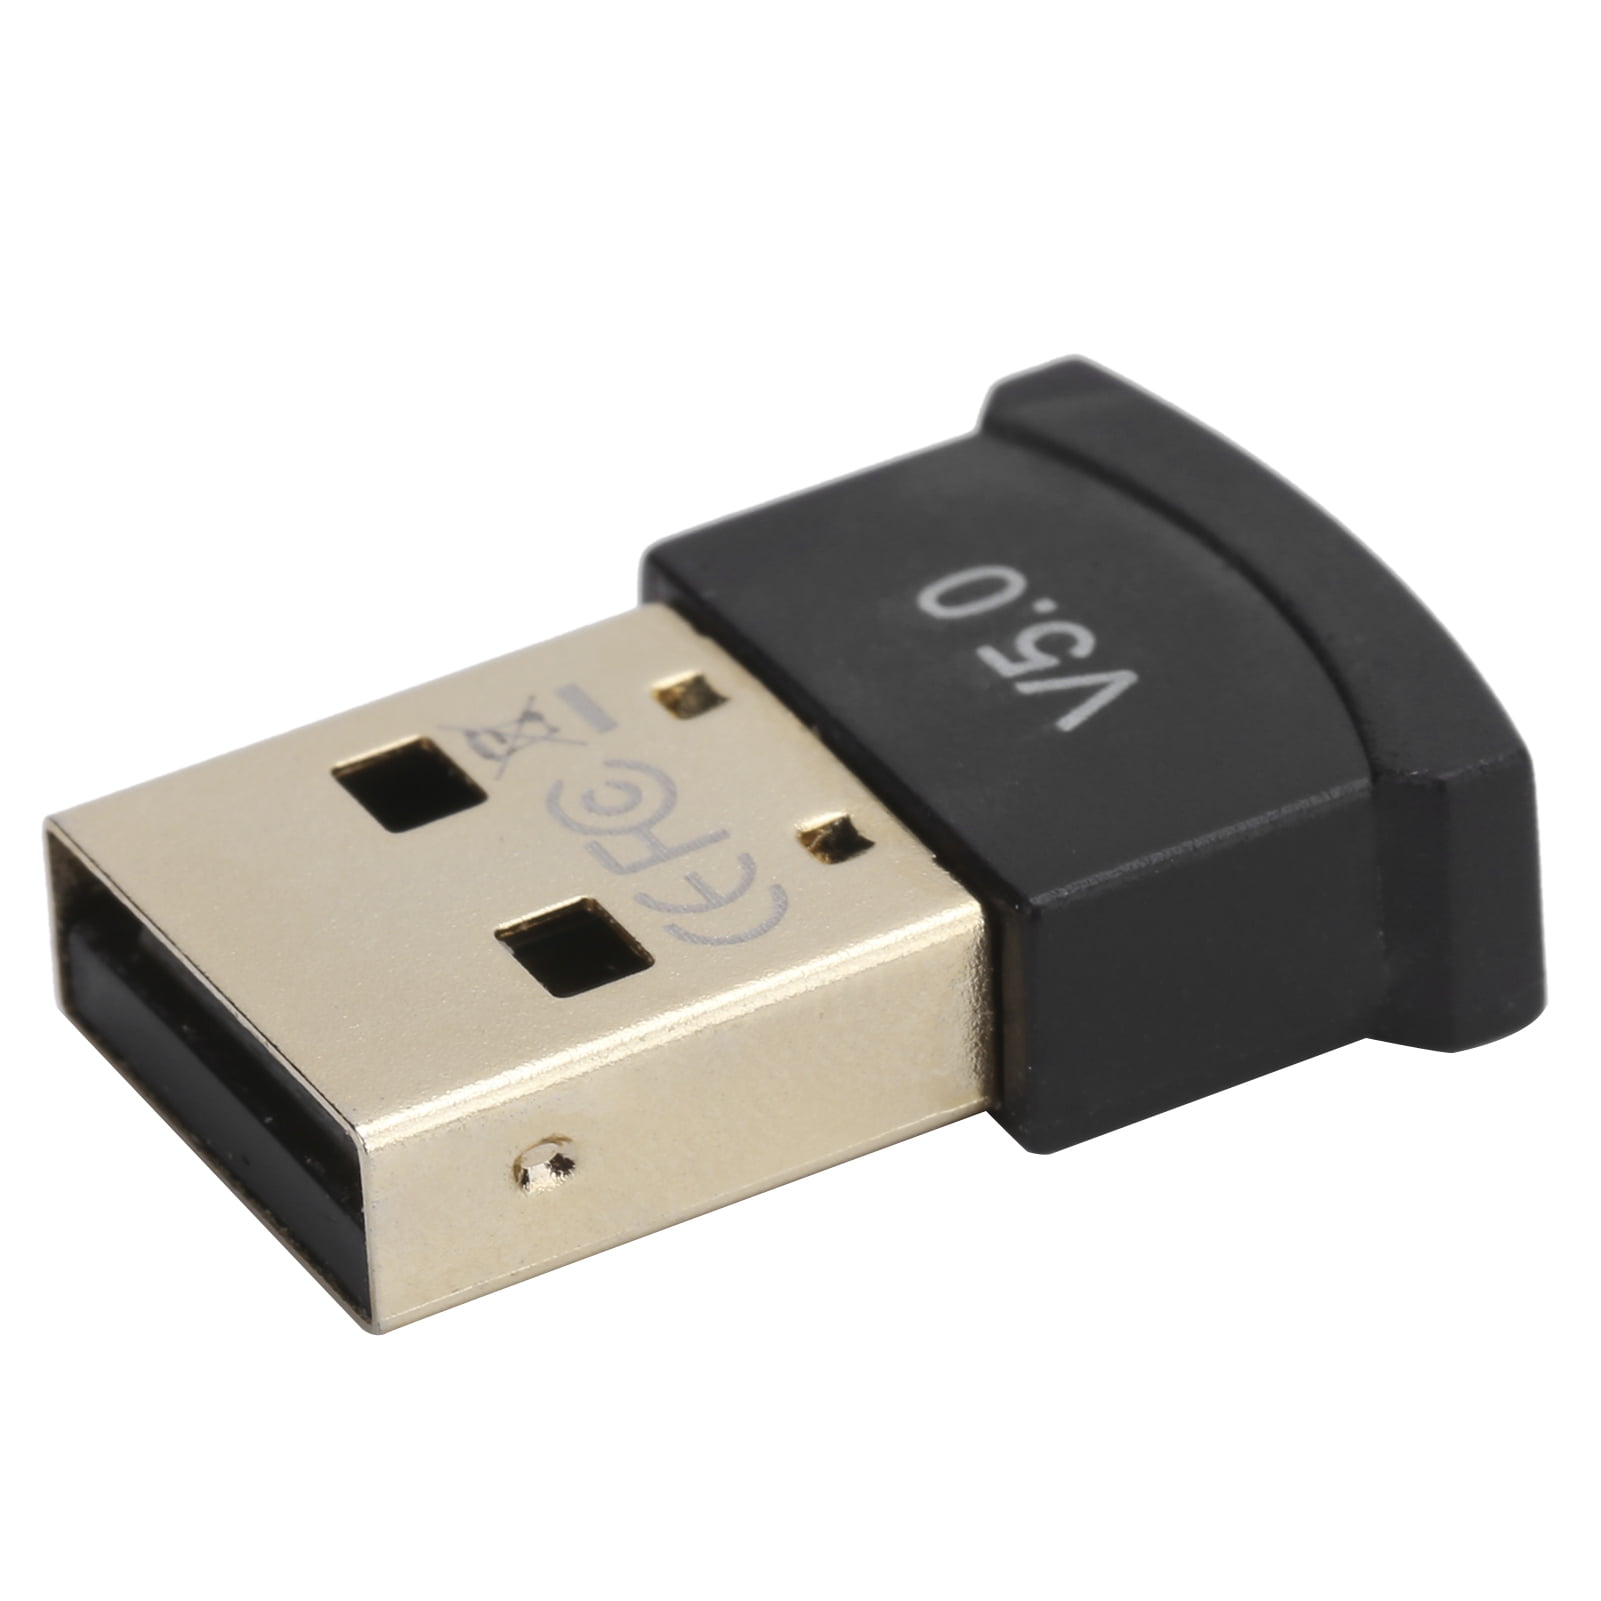 Bluetooth USB Adapter For PC Laptop Zexmte Transfer Wireless Plug And Play 